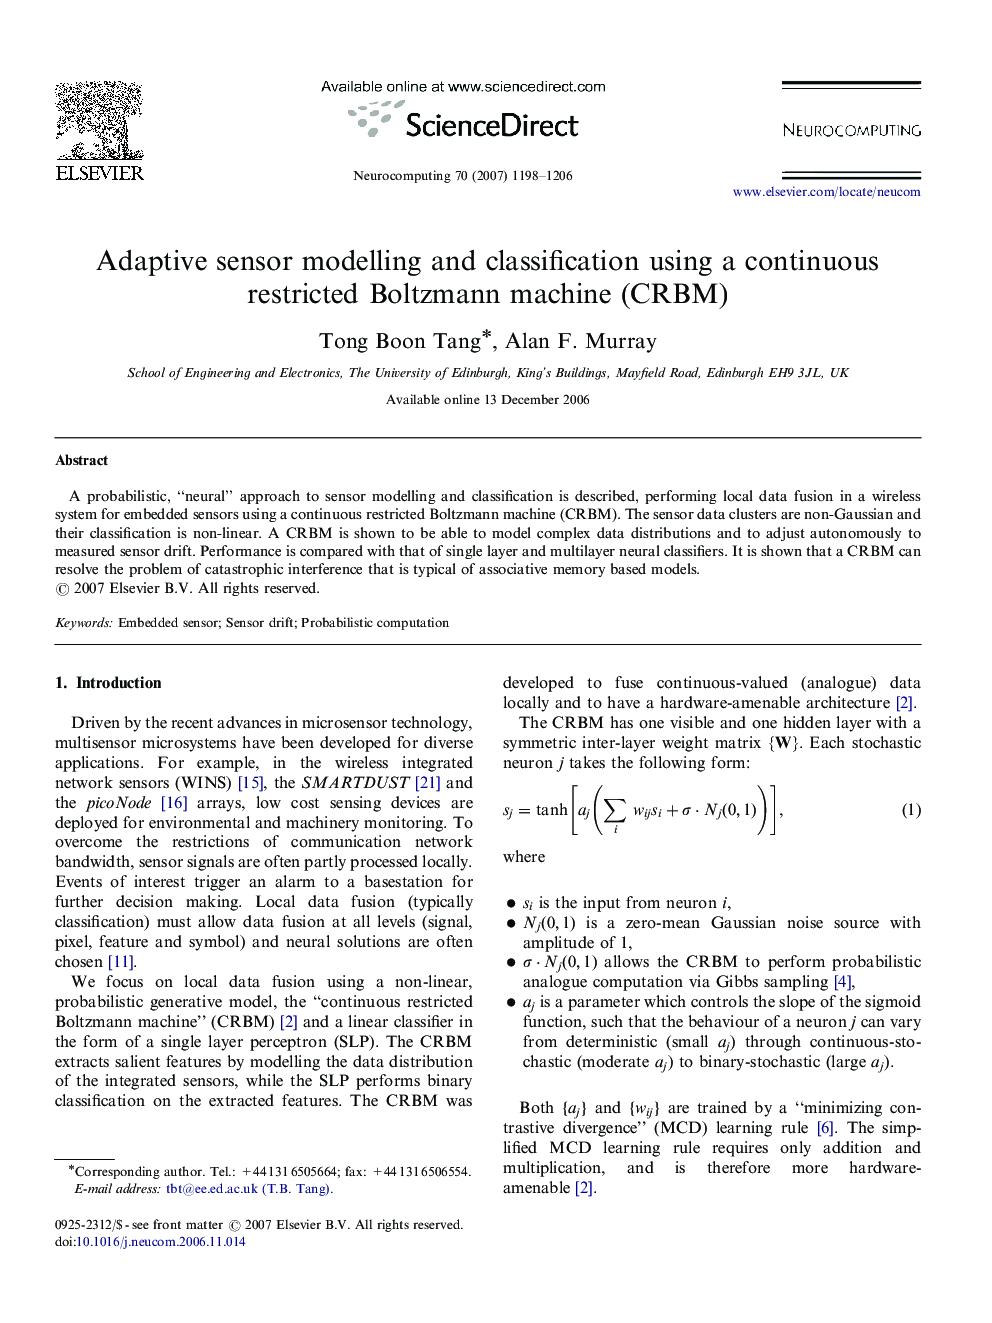 Adaptive sensor modelling and classification using a continuous restricted Boltzmann machine (CRBM)